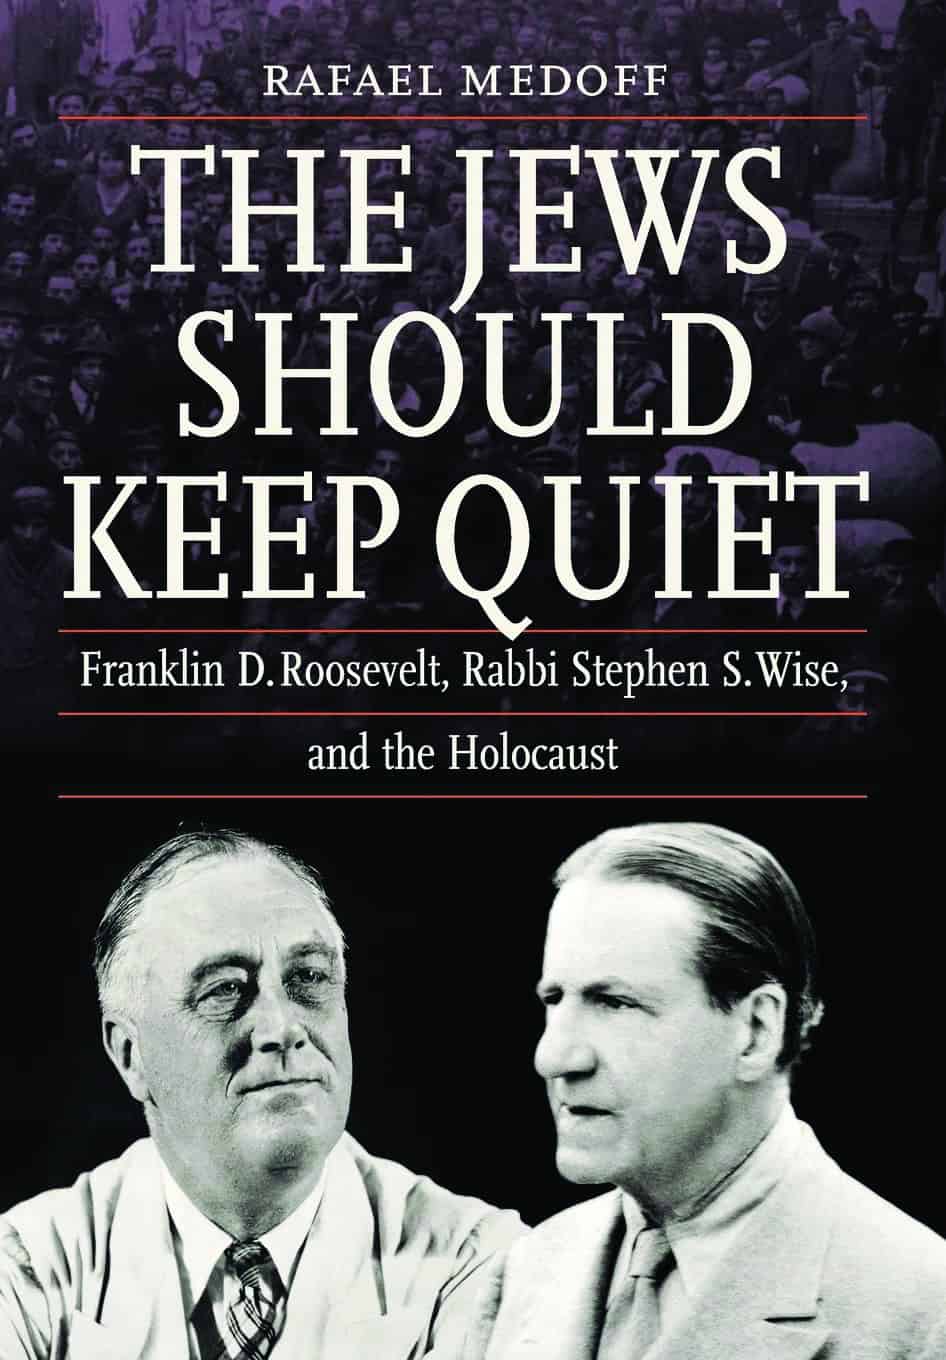 The Jews Should Keep Quiet (Franklin D. Roosevelt, Rabbi Stephen S. Wise, and the Holocaust)